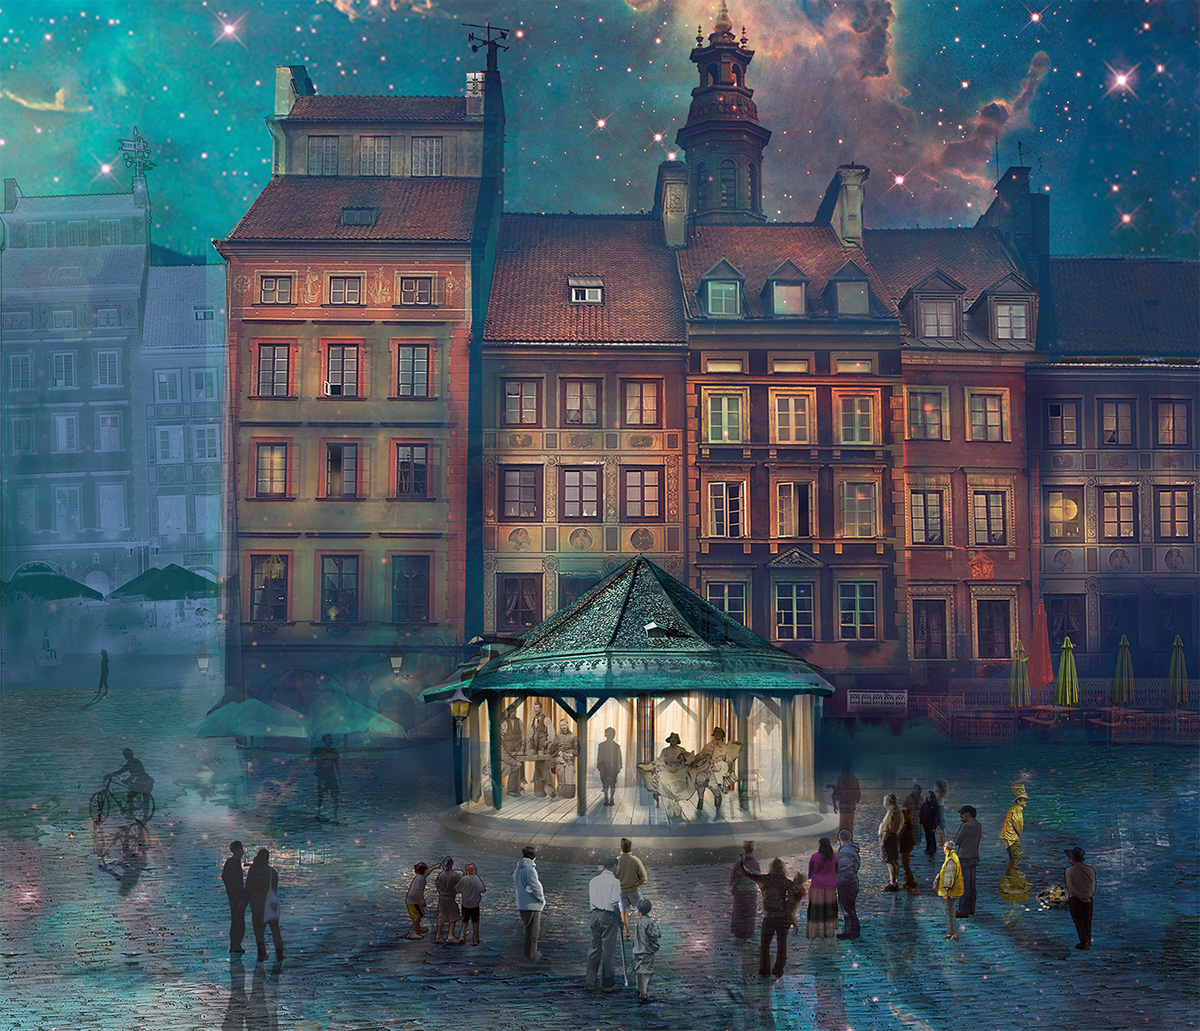 nocturne starry night actors in theater old marketplace old town houses Magic light collage art Digital Art 